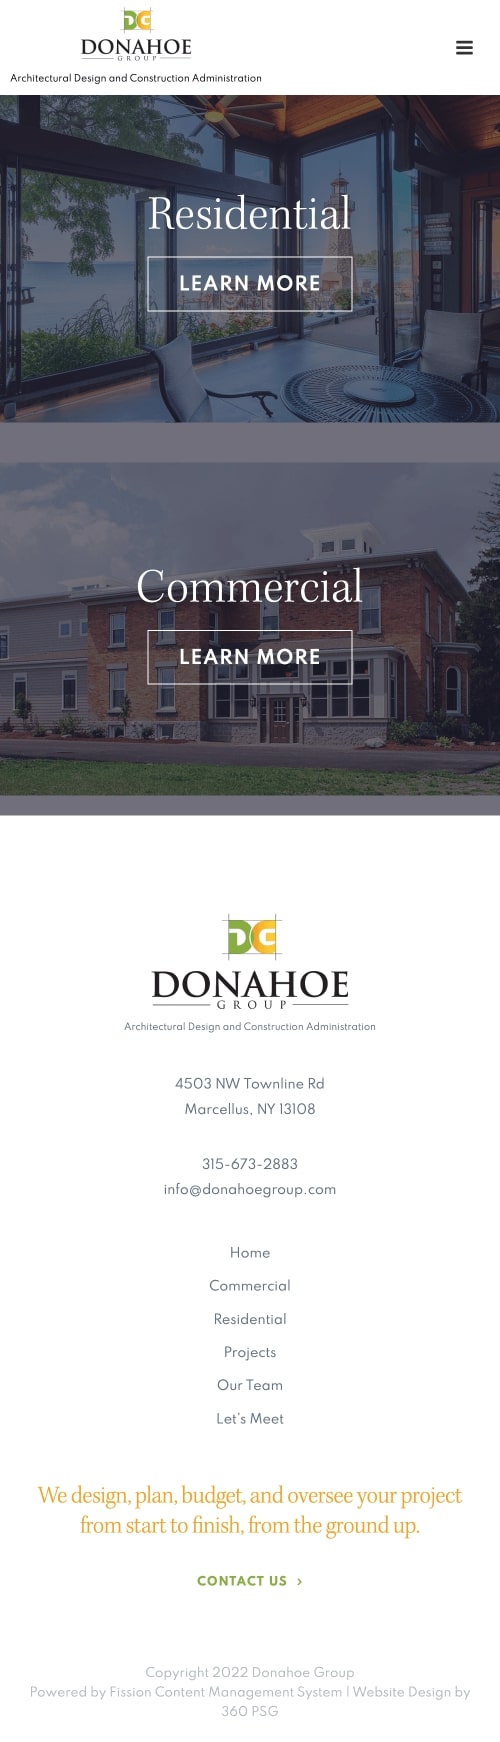 Donahoe Group Website - Mobile